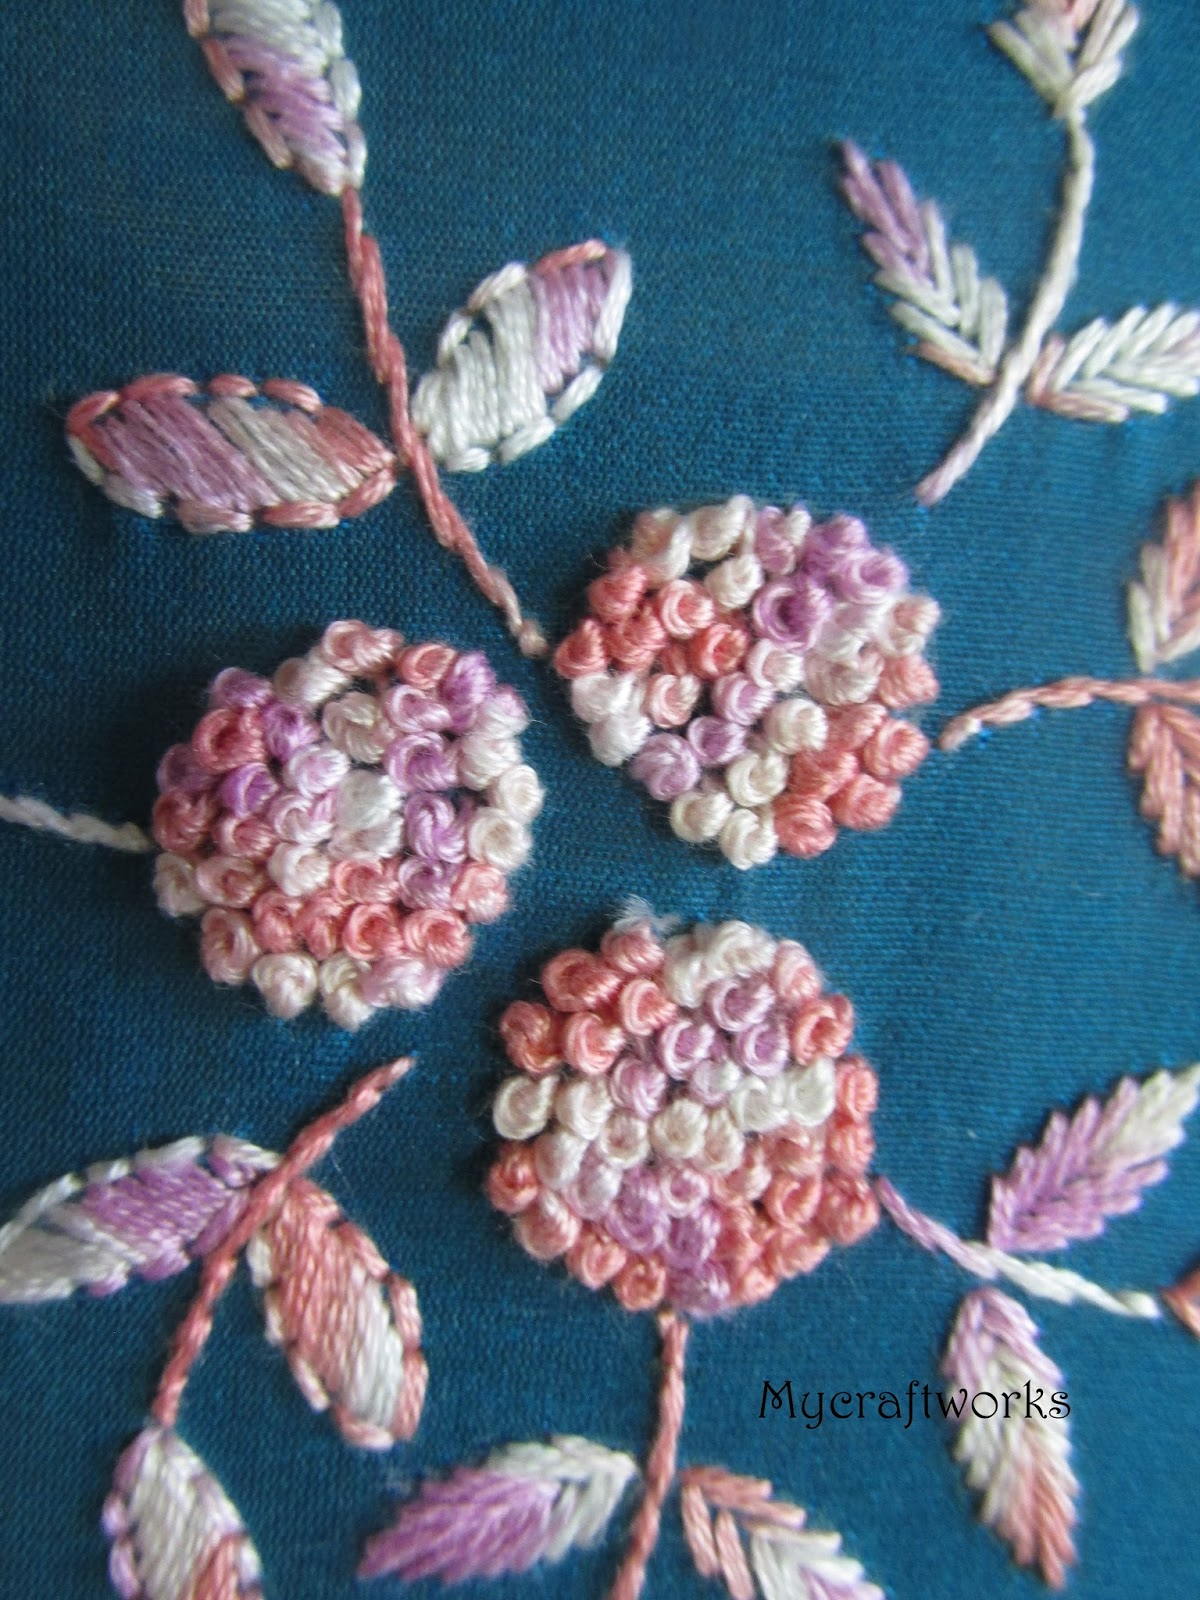 French Knot Embroidery Patterns My Craft Works Embroidery Pattern 3 French Knots Flower